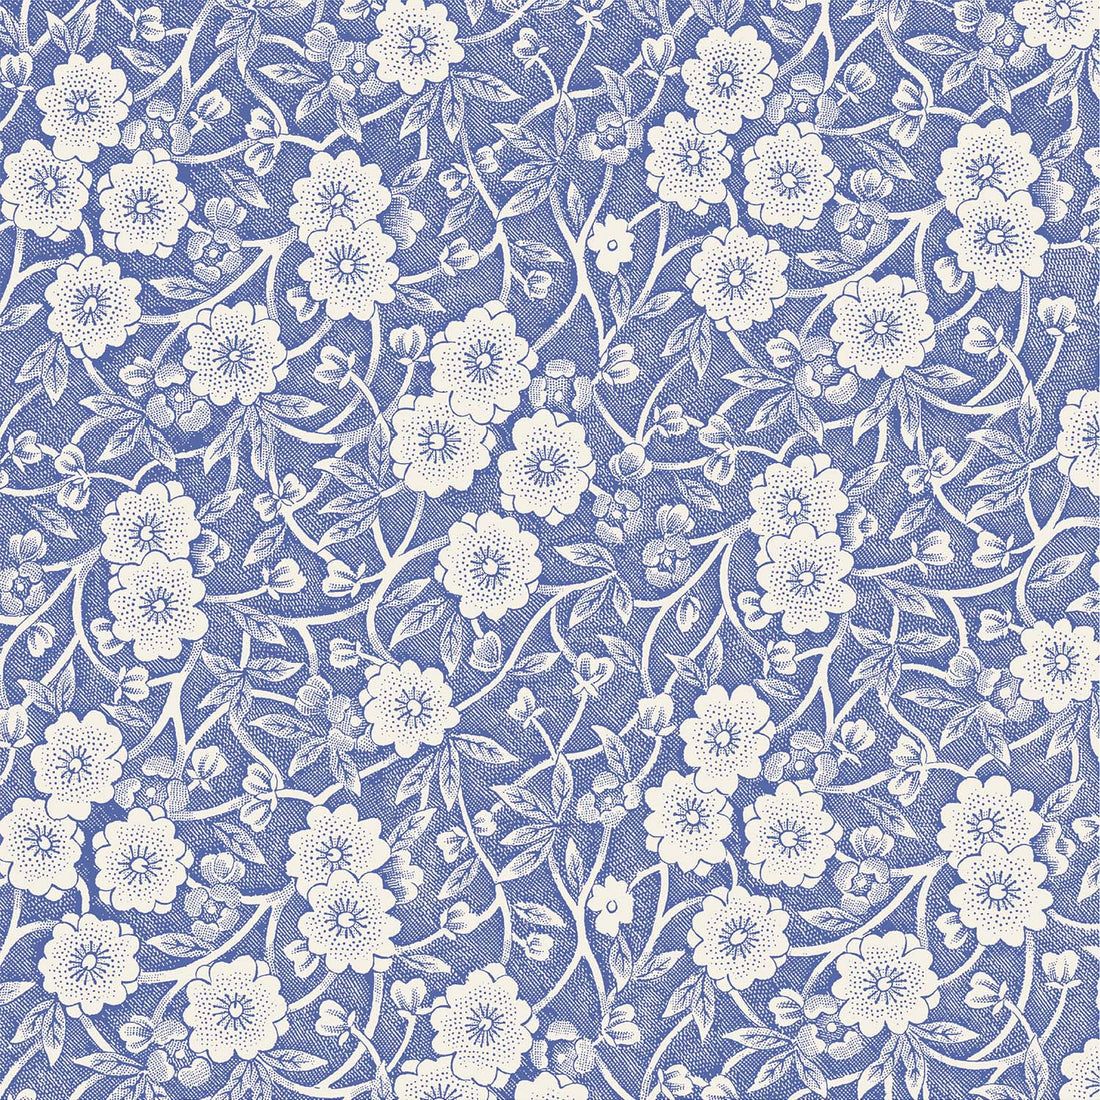 A square cocktail napkin featuring a dense pattern of white flowers, stems and leaves on a medium blue background.